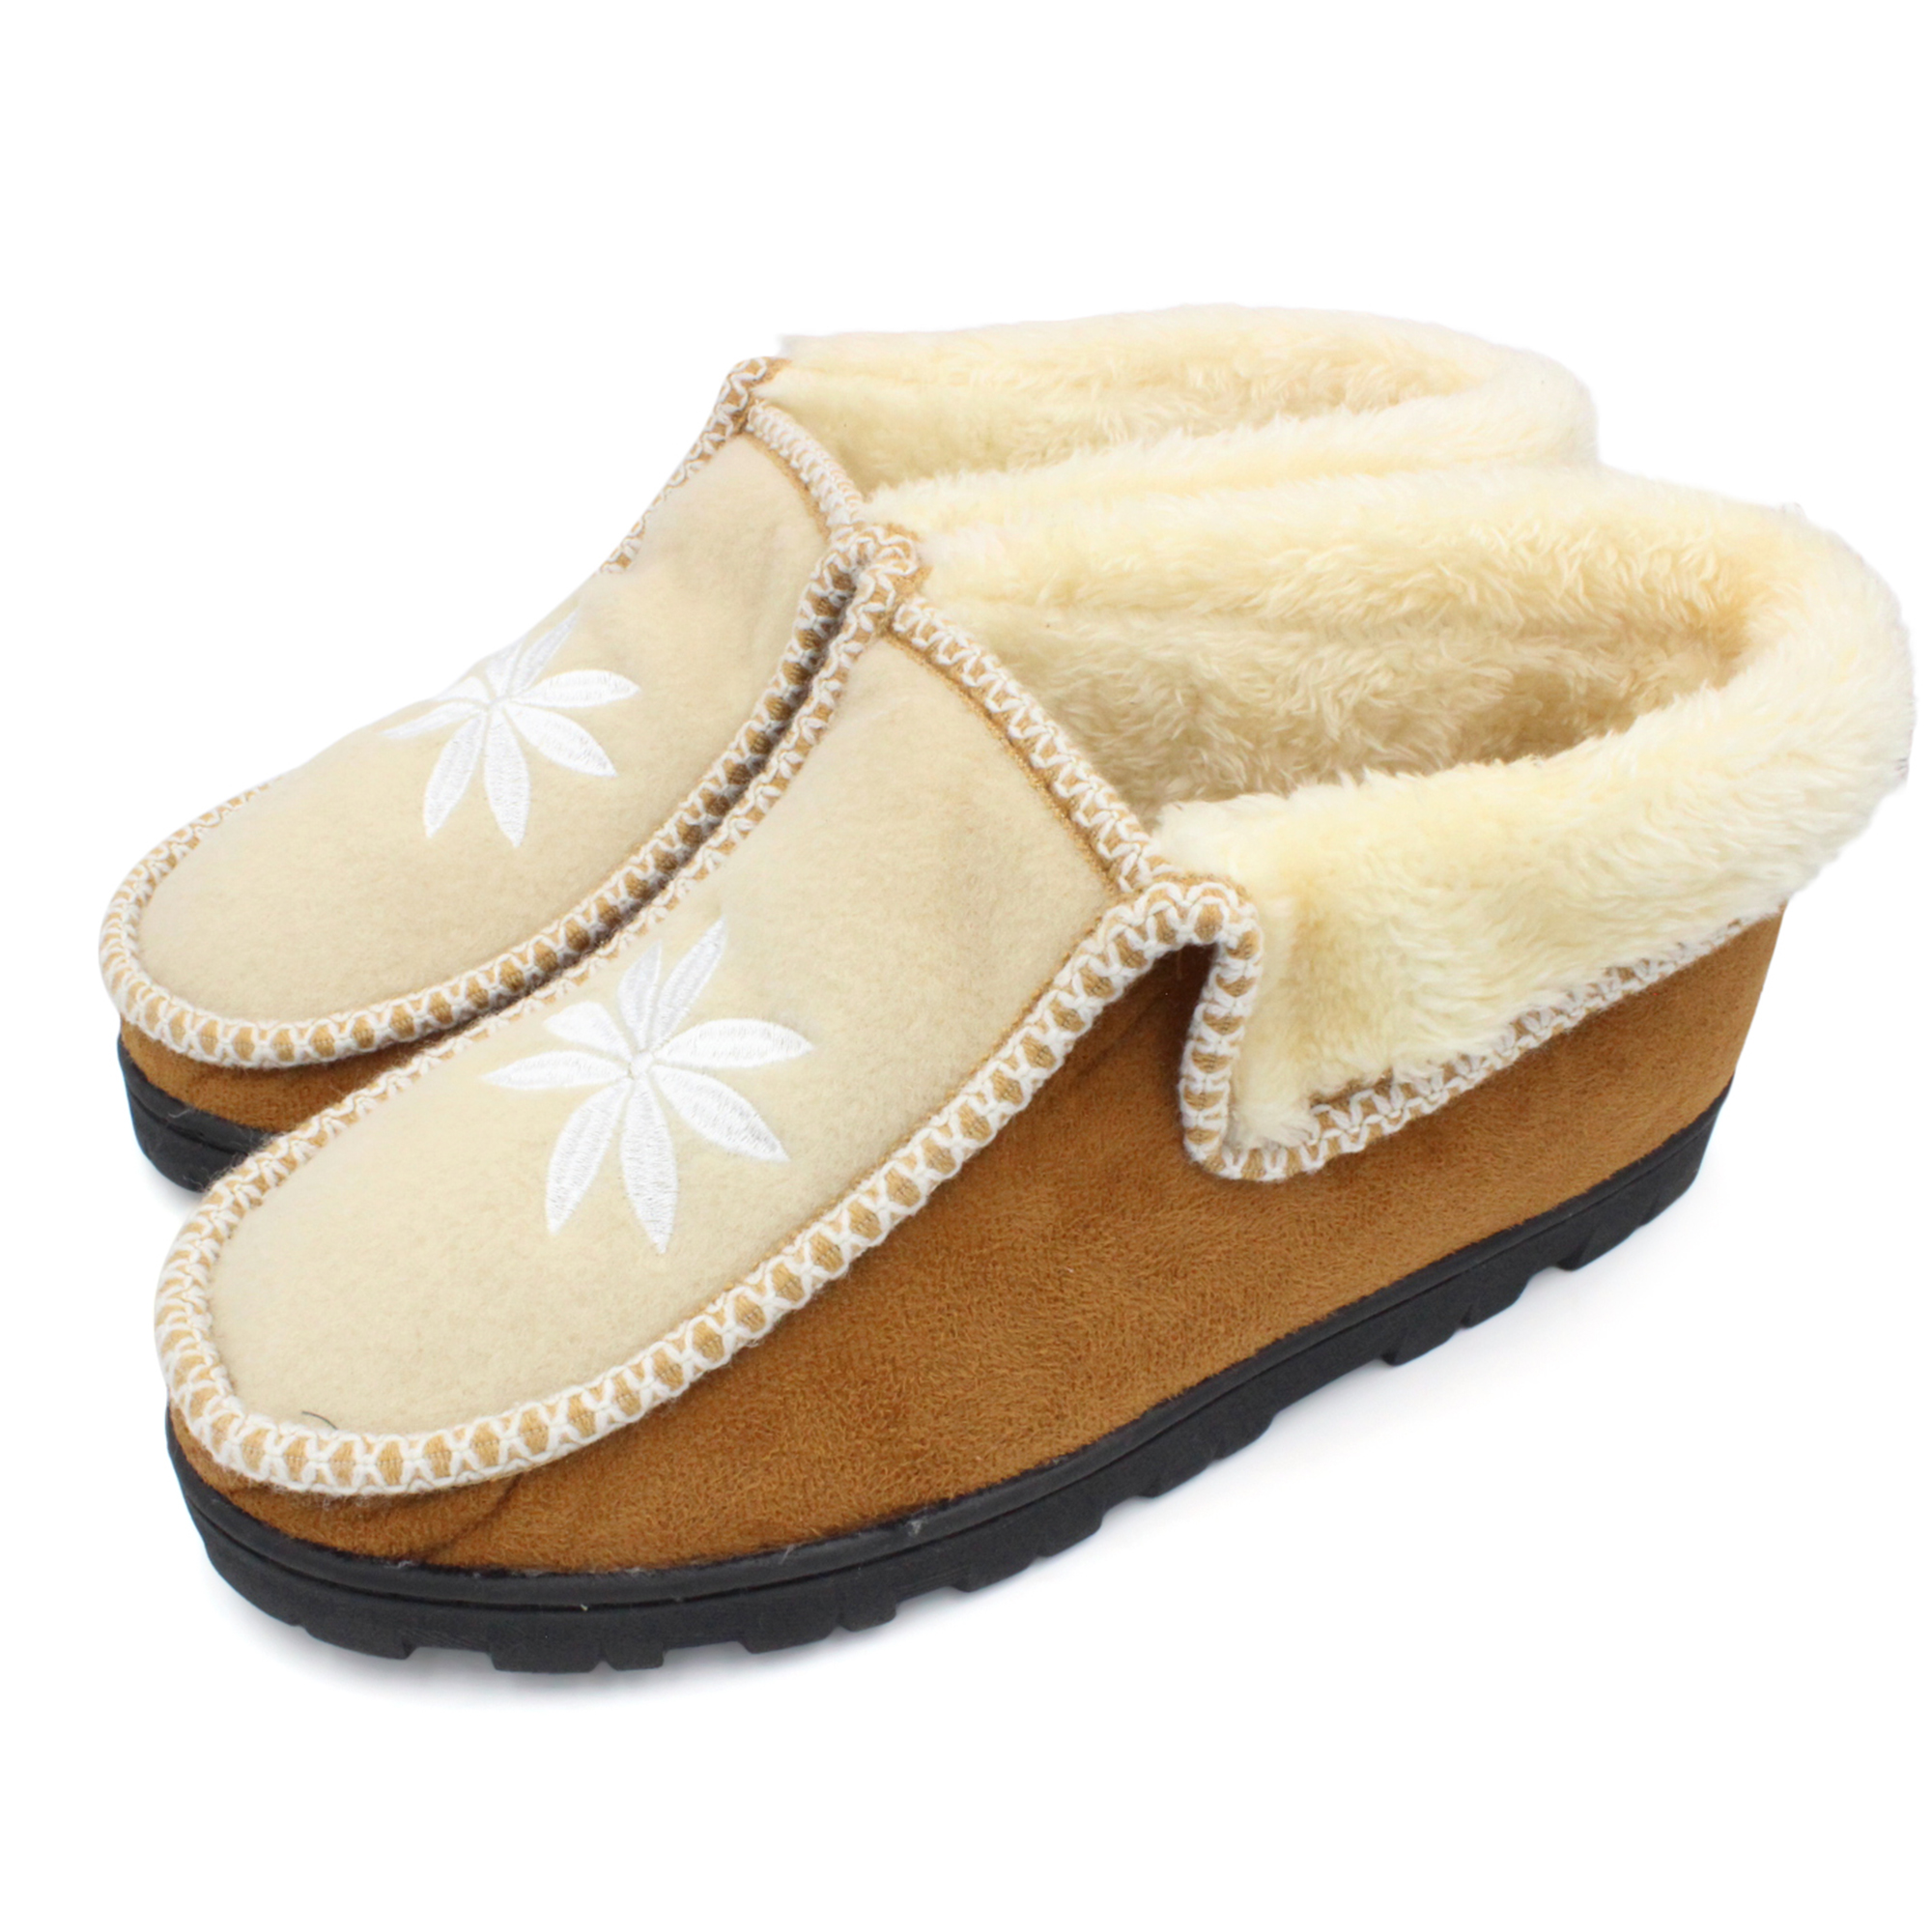 Womens Soft Fur Lined Suede Winter Moccasin Slippers Cozy Slip On House Shoes 